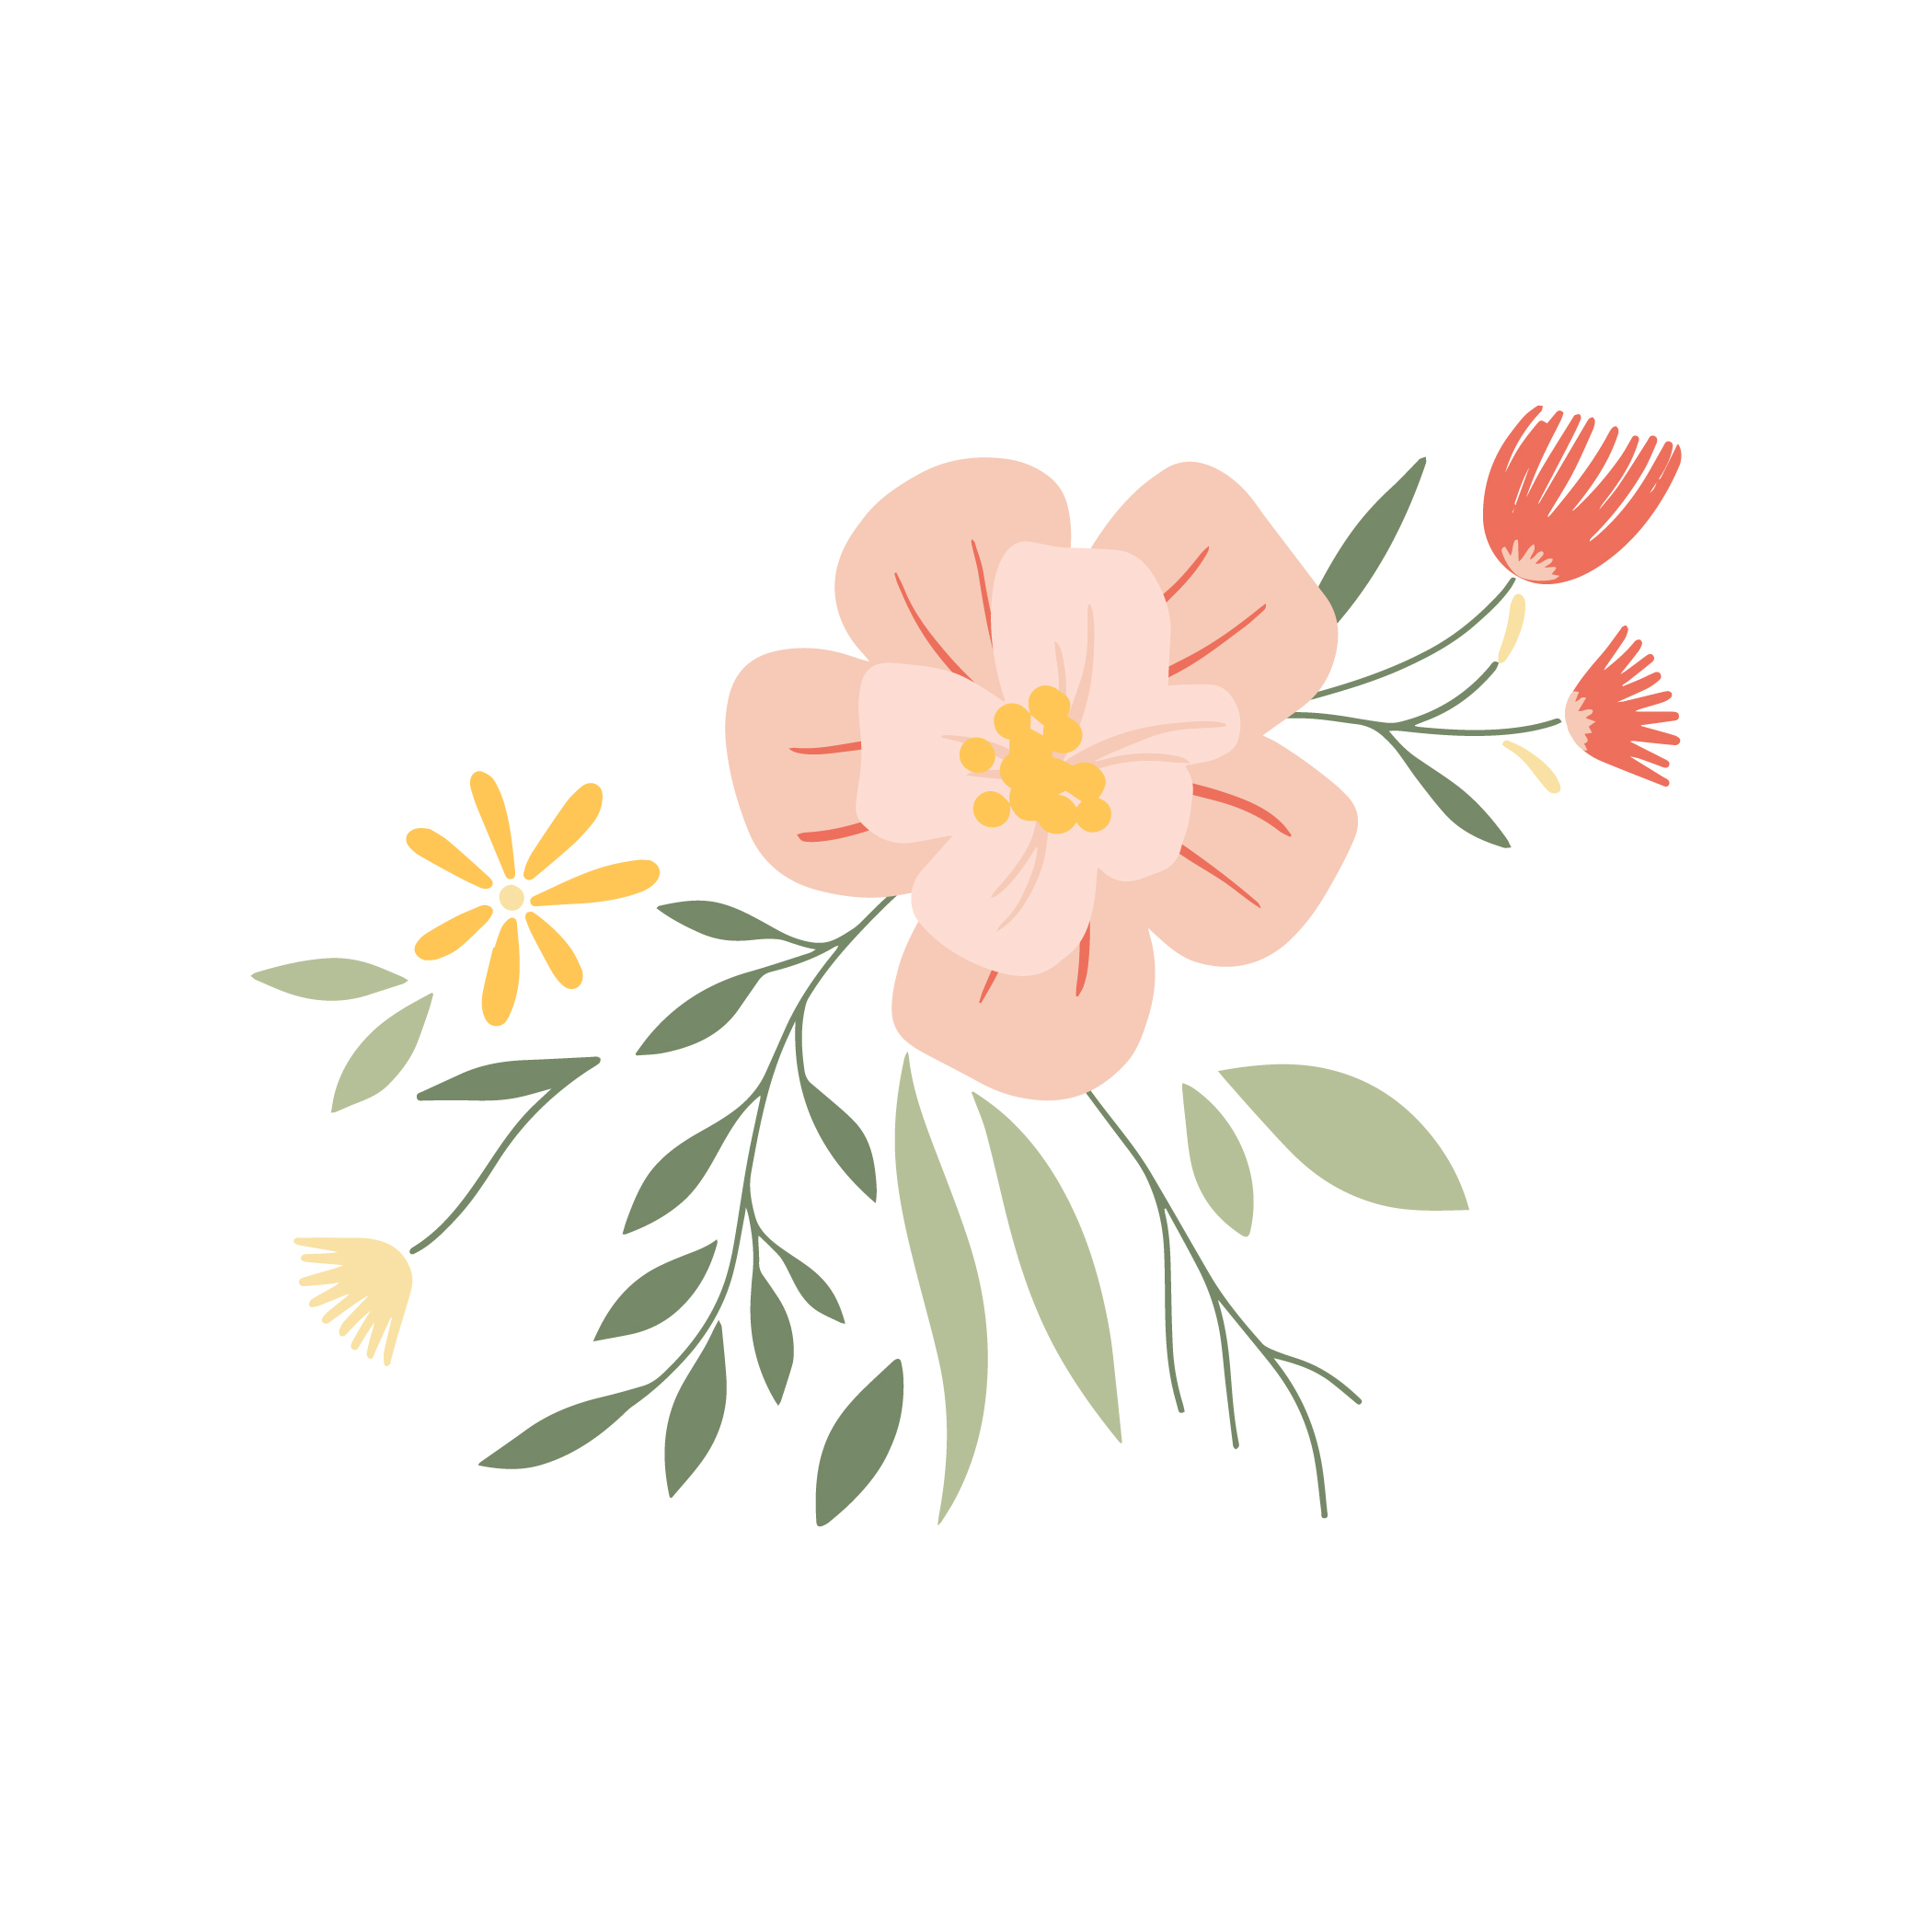 Flower Cluster #2 SVG Cut File - Snap Click Supply Co.